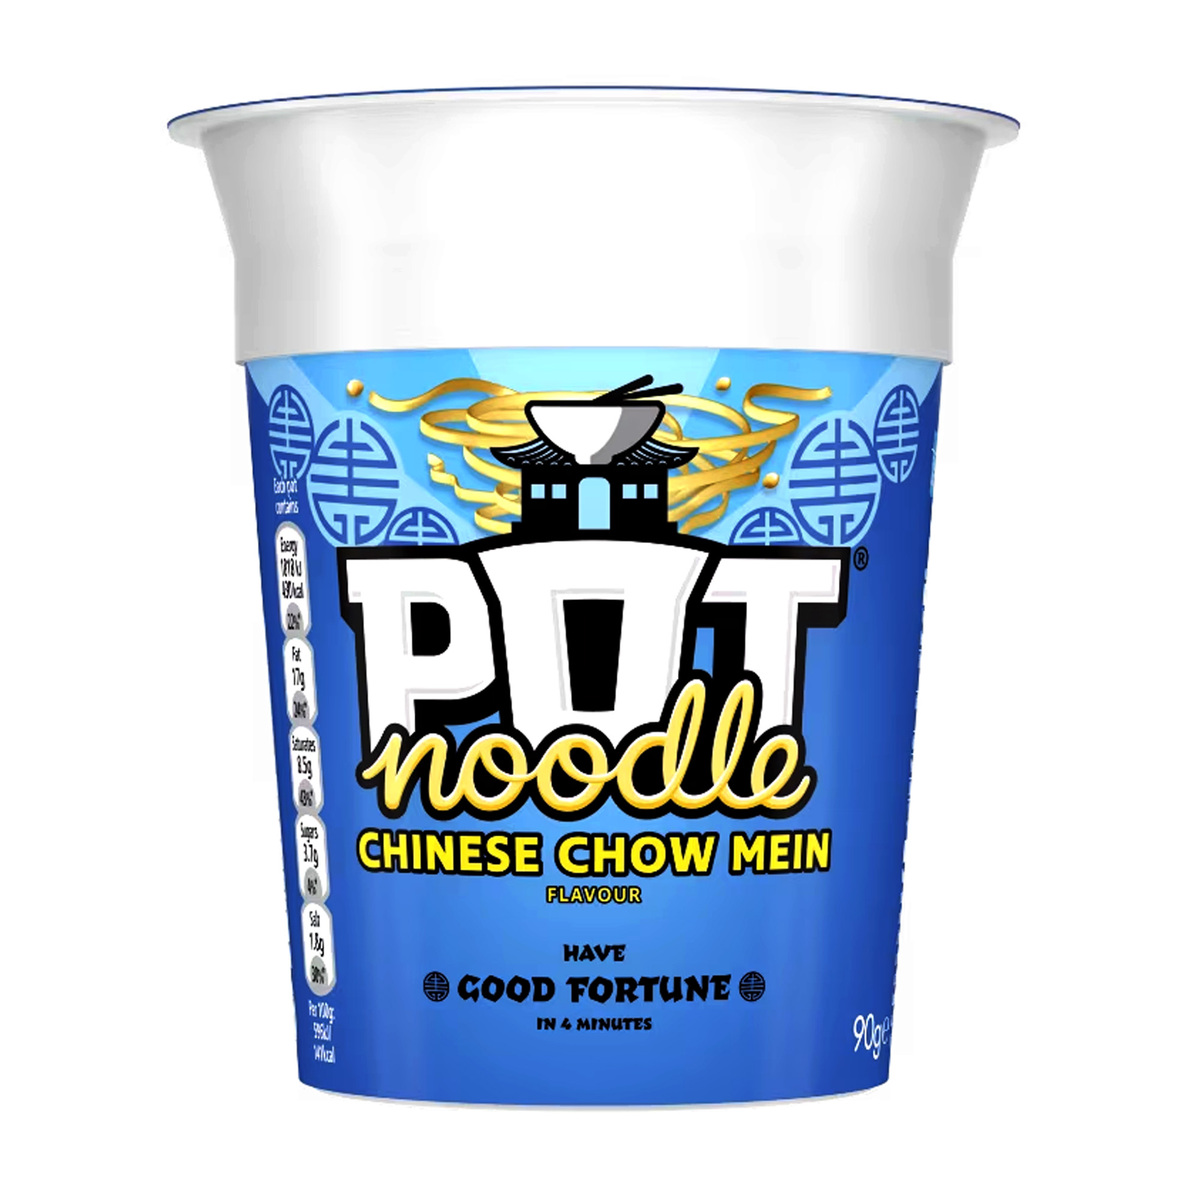 Unilever Pot Noodle Chinese Chow Mein, 90 g